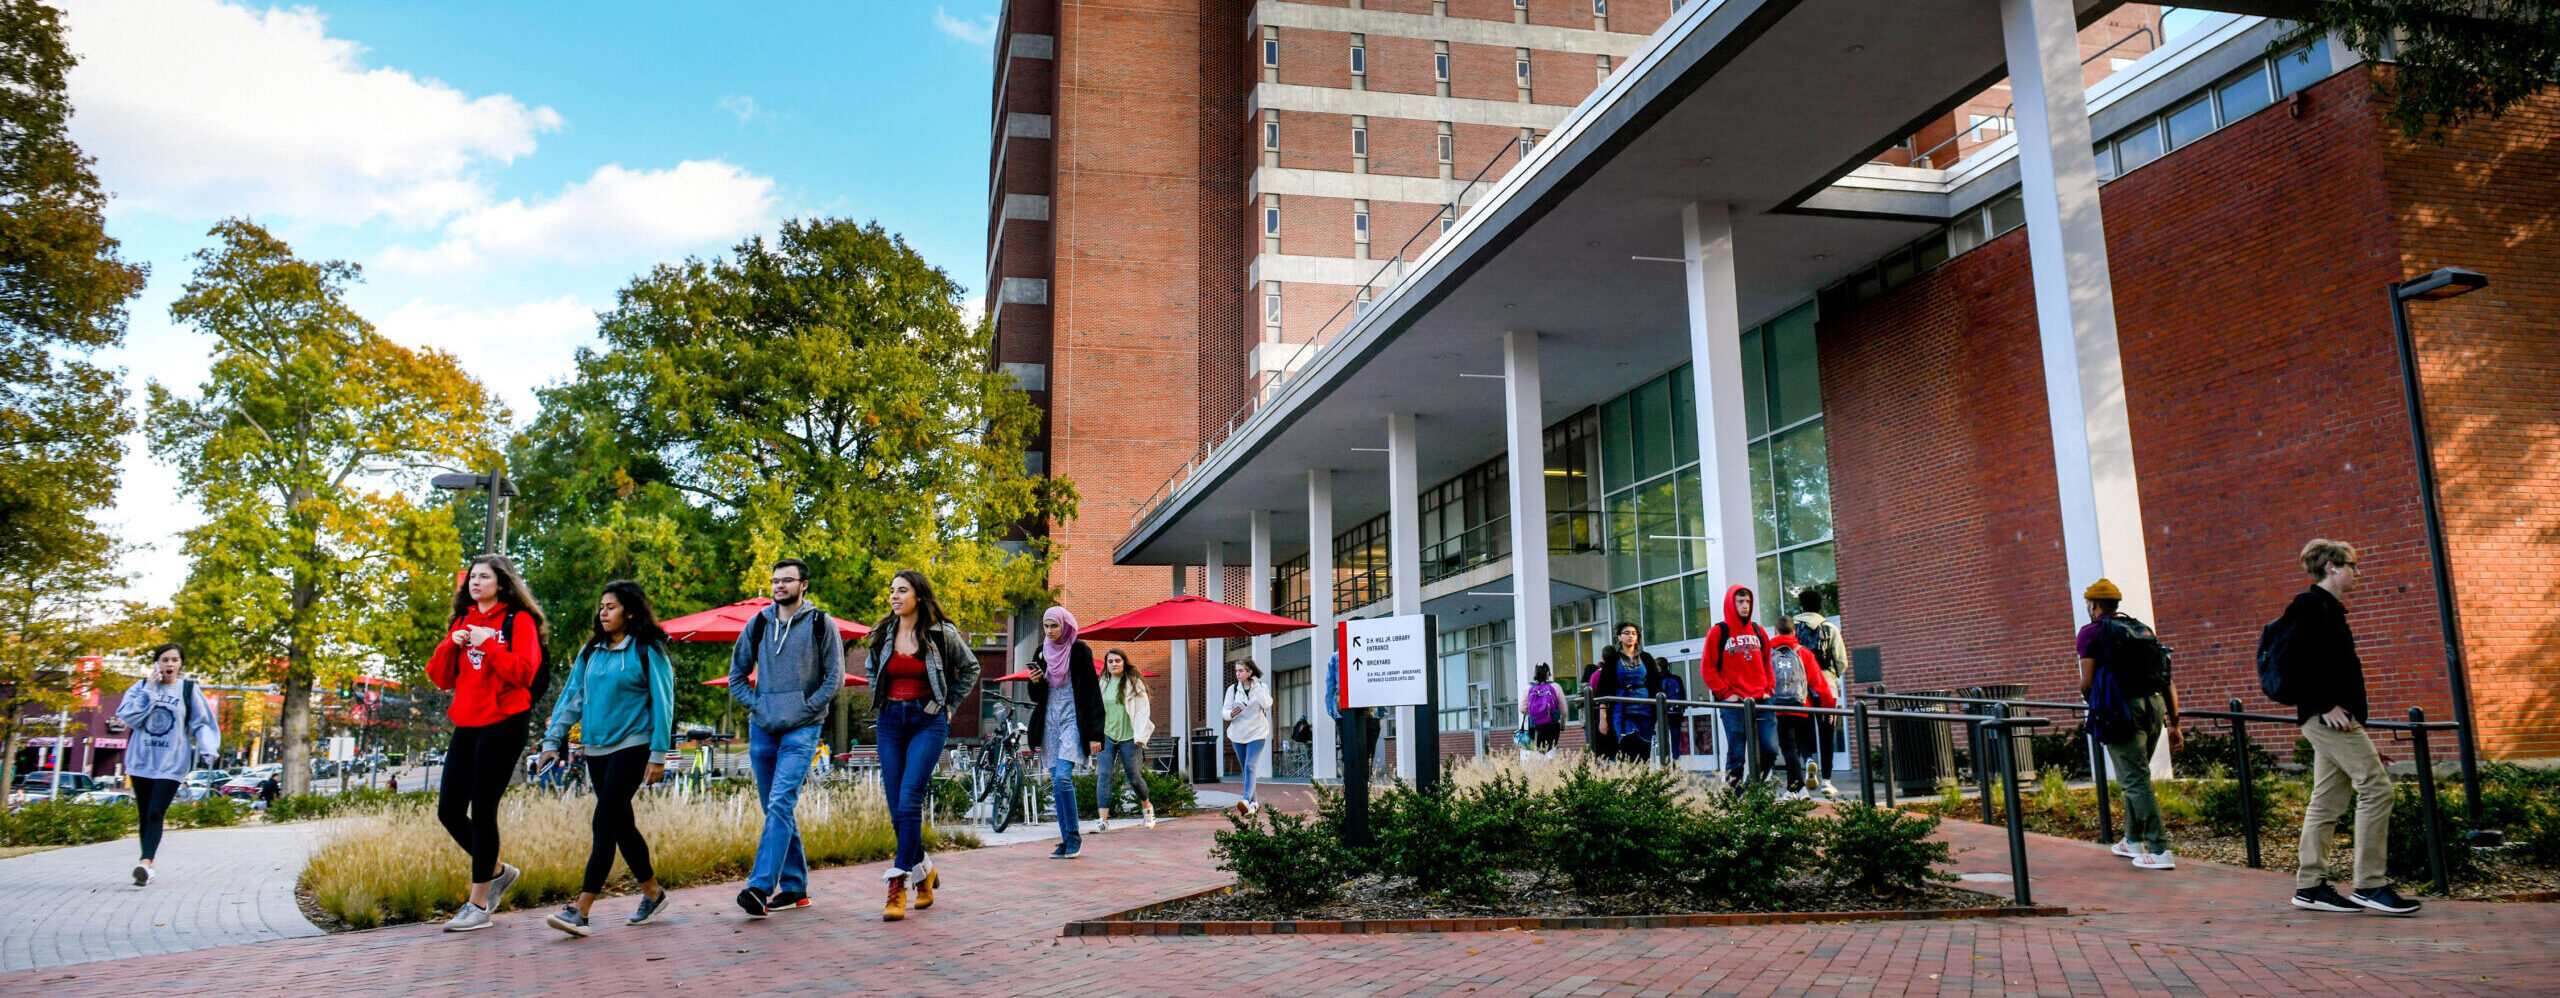 Students walk in front of DH Hill Jr. Library